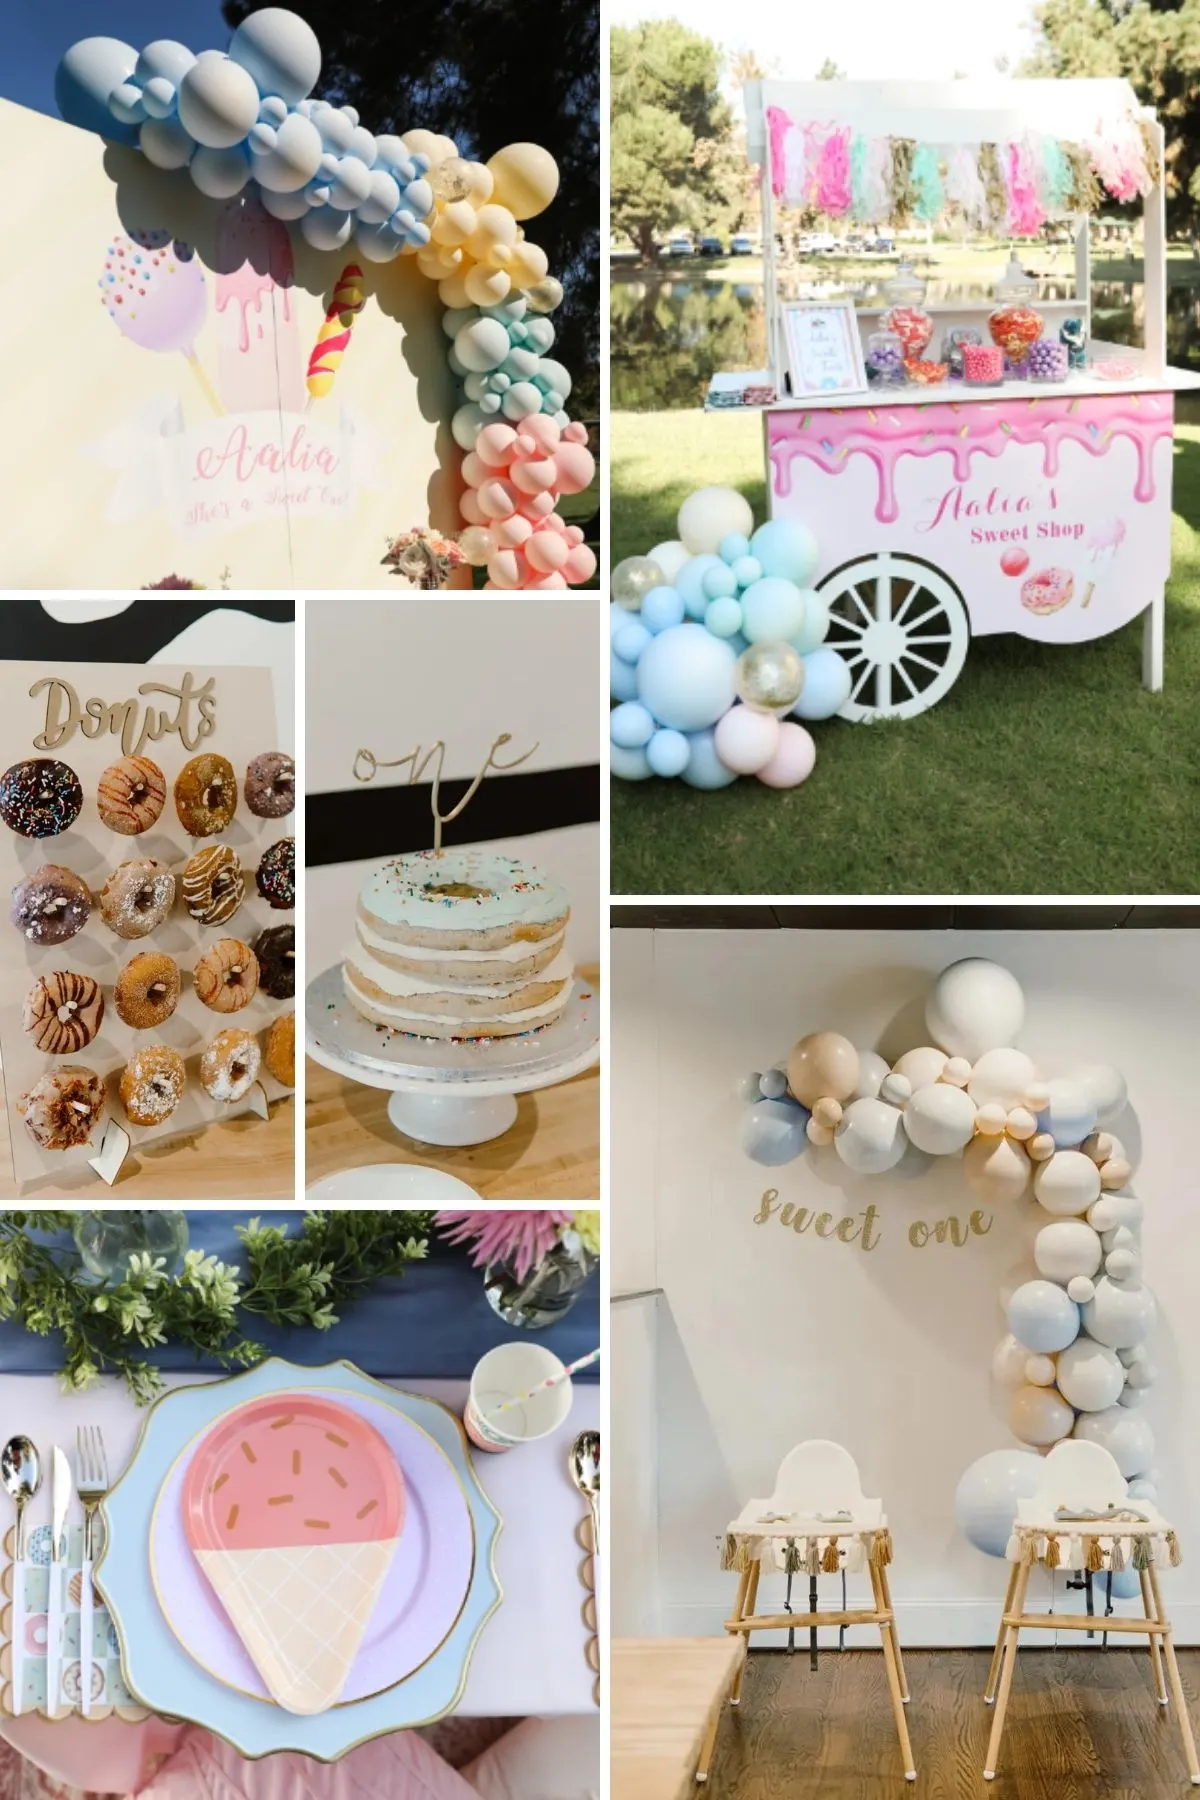 Photo collage from sweet one party theme including place settings, an ice cream cart, and balloon garlands.